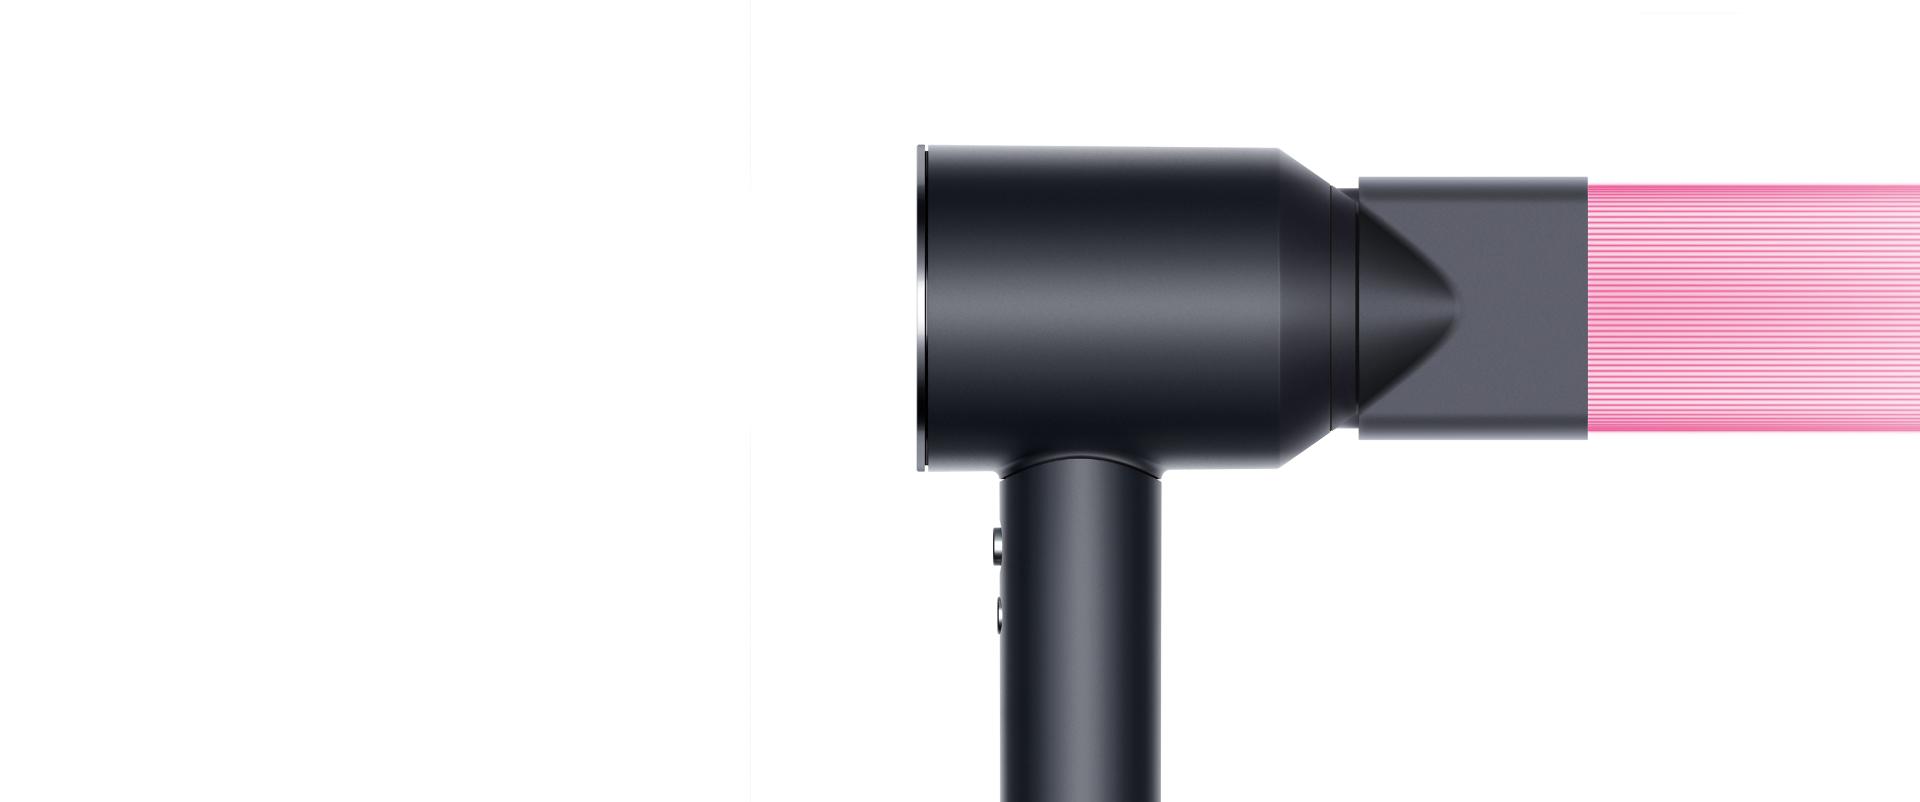 Dyson Supersonic™yson-h.assetsadobe2.com/is/image/content/dam/dyson/ser hair dryer Black/Nickel with Styling concentrator